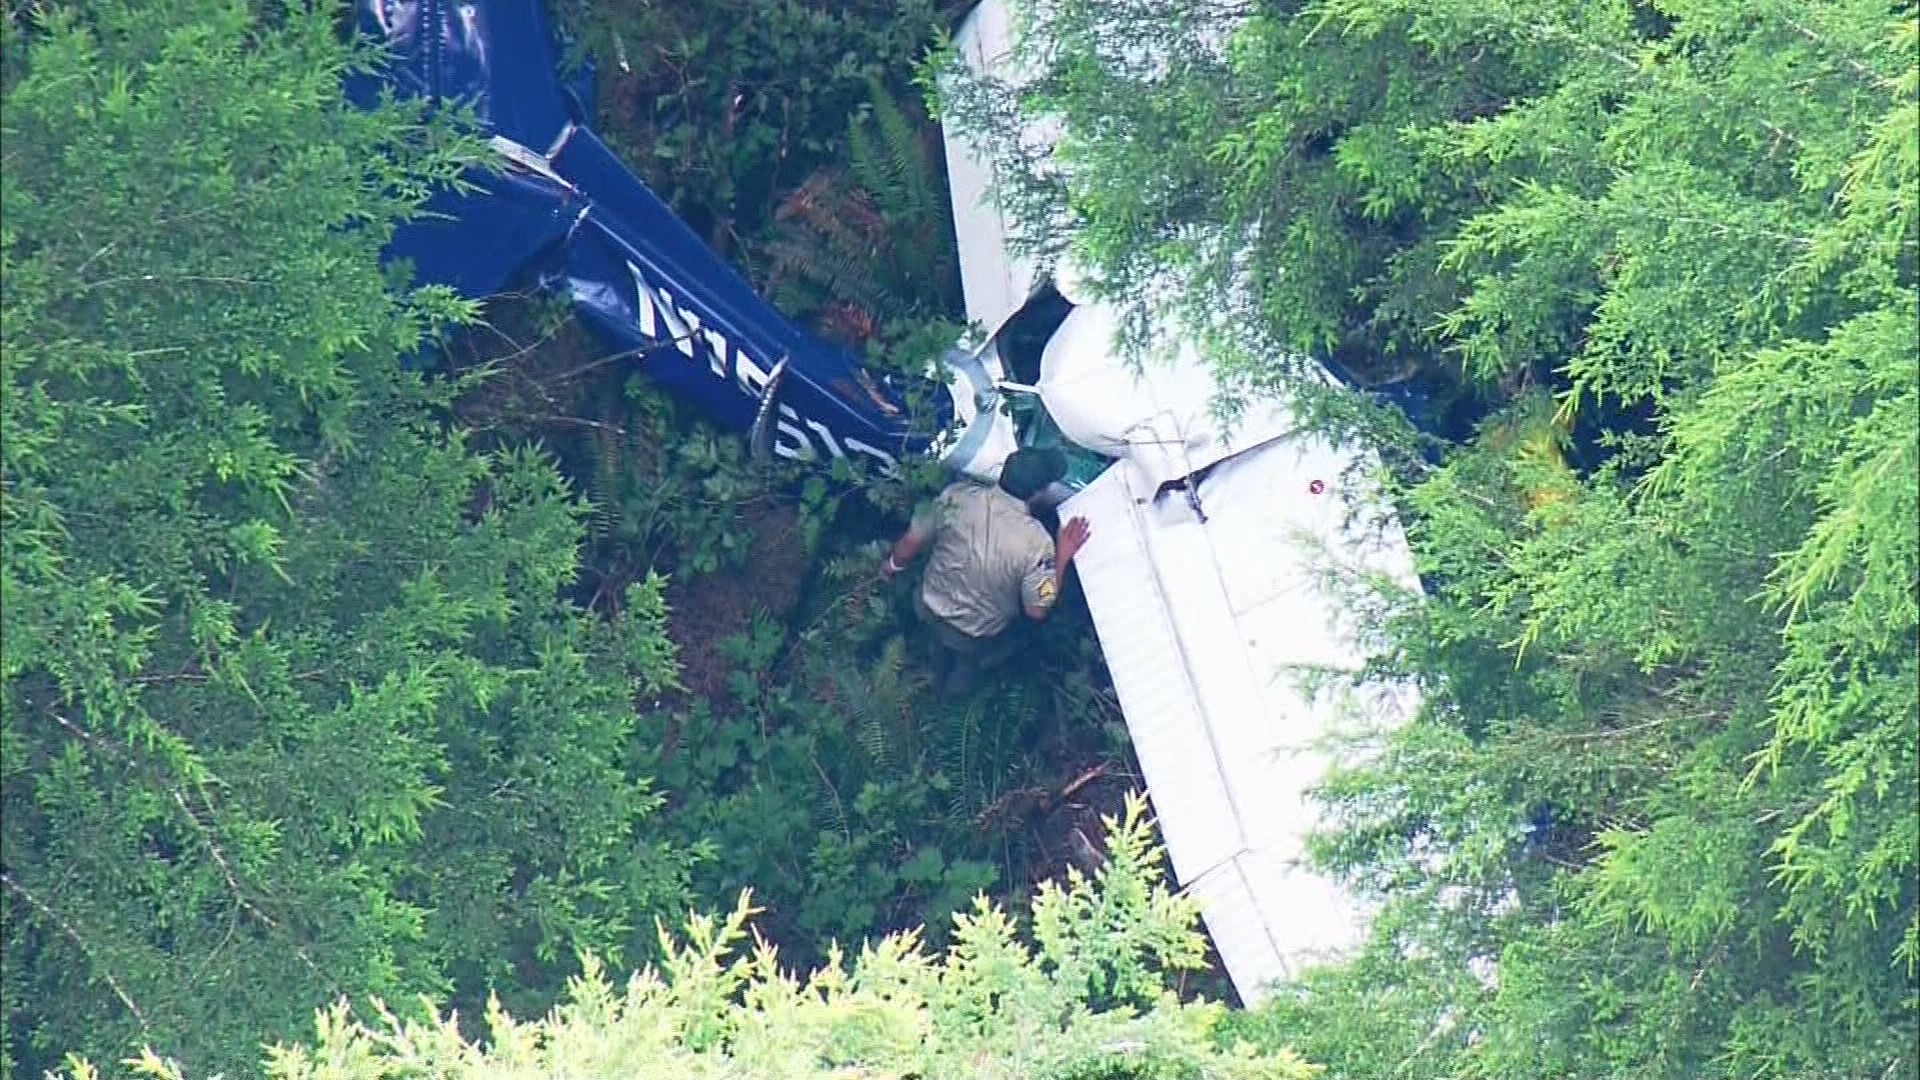 A person of interest was found inside a stolen plane after it crashed in Olympic National Park. The Cessna 150 was reportedly stolen from Jefferson County Airport.